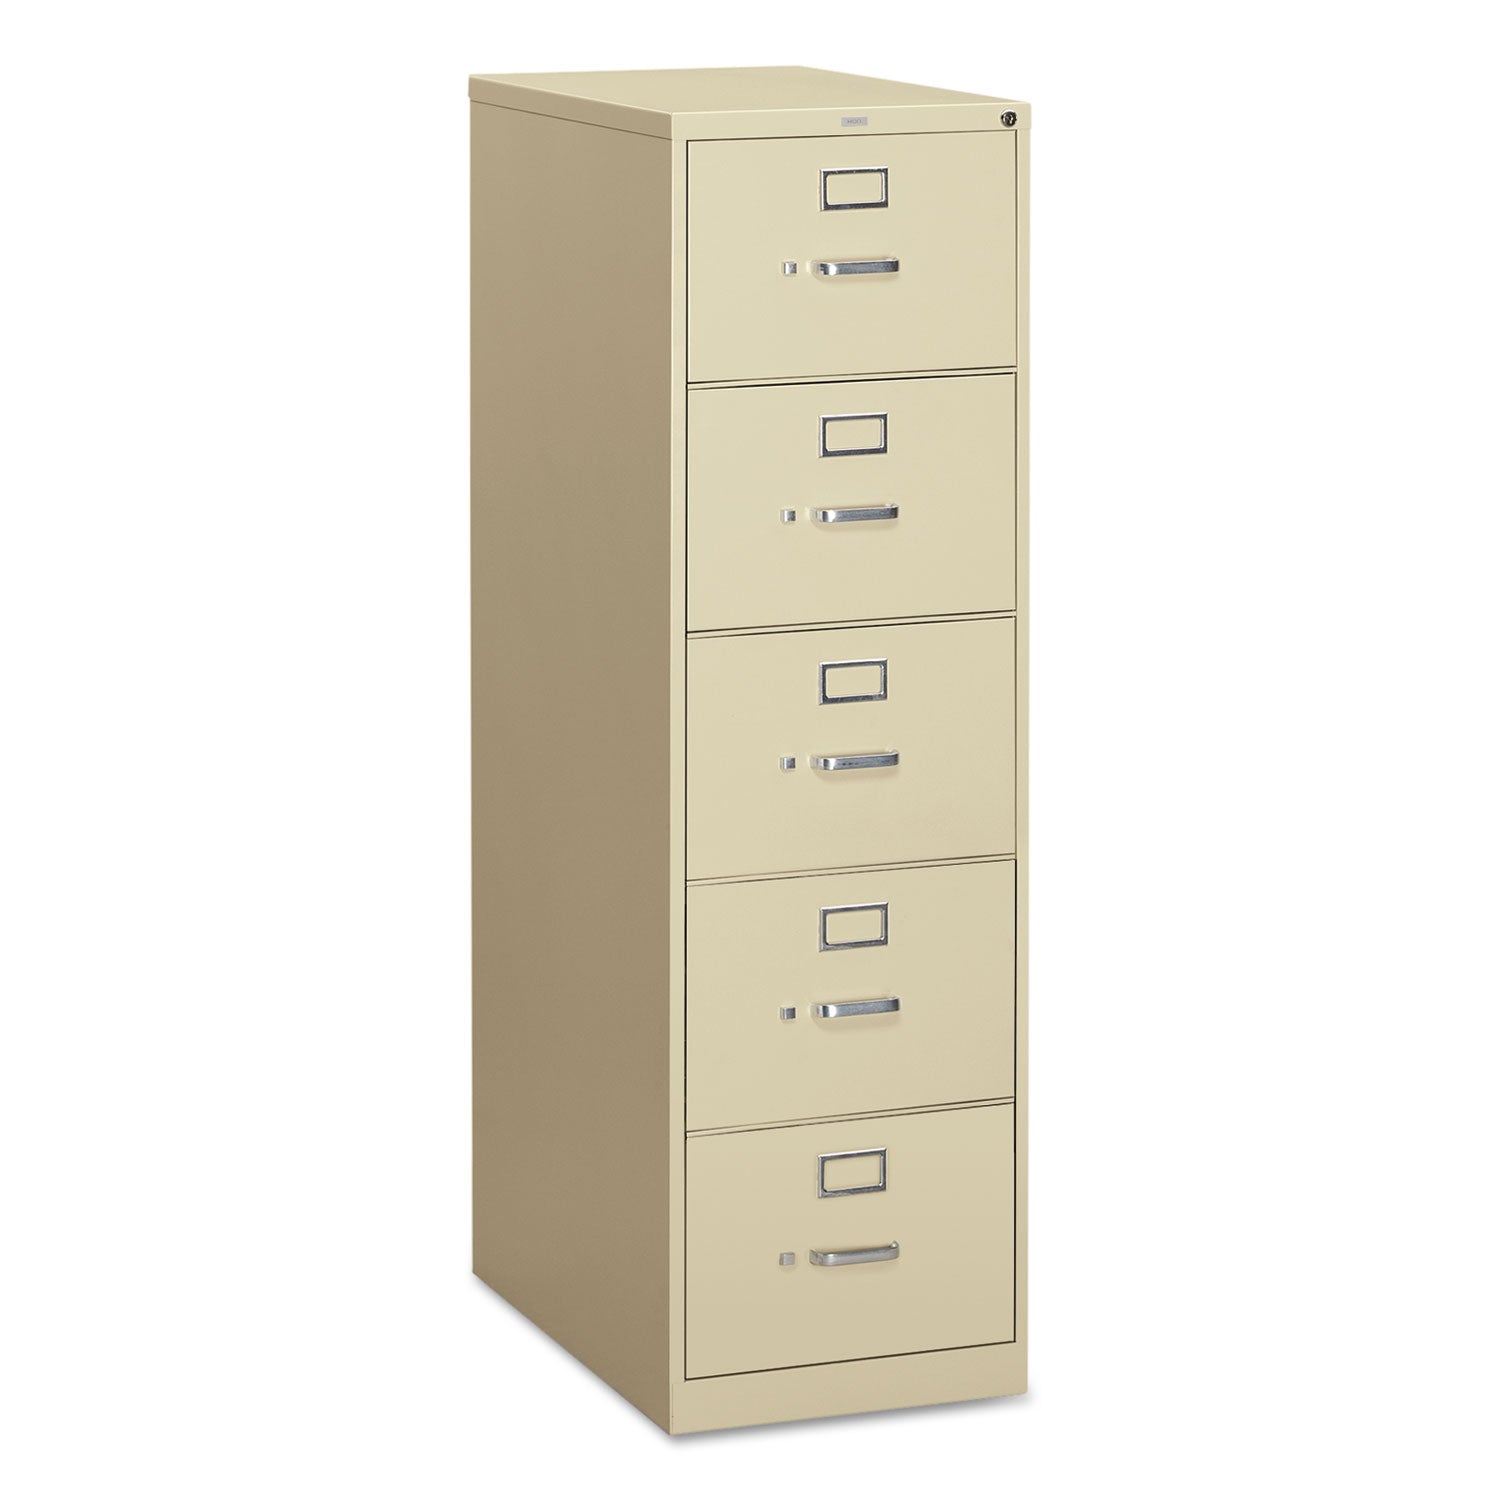 310 Series Vertical File, 5 Legal-Size File Drawers, Putty, 18.25" x 26.5" x 60 - 